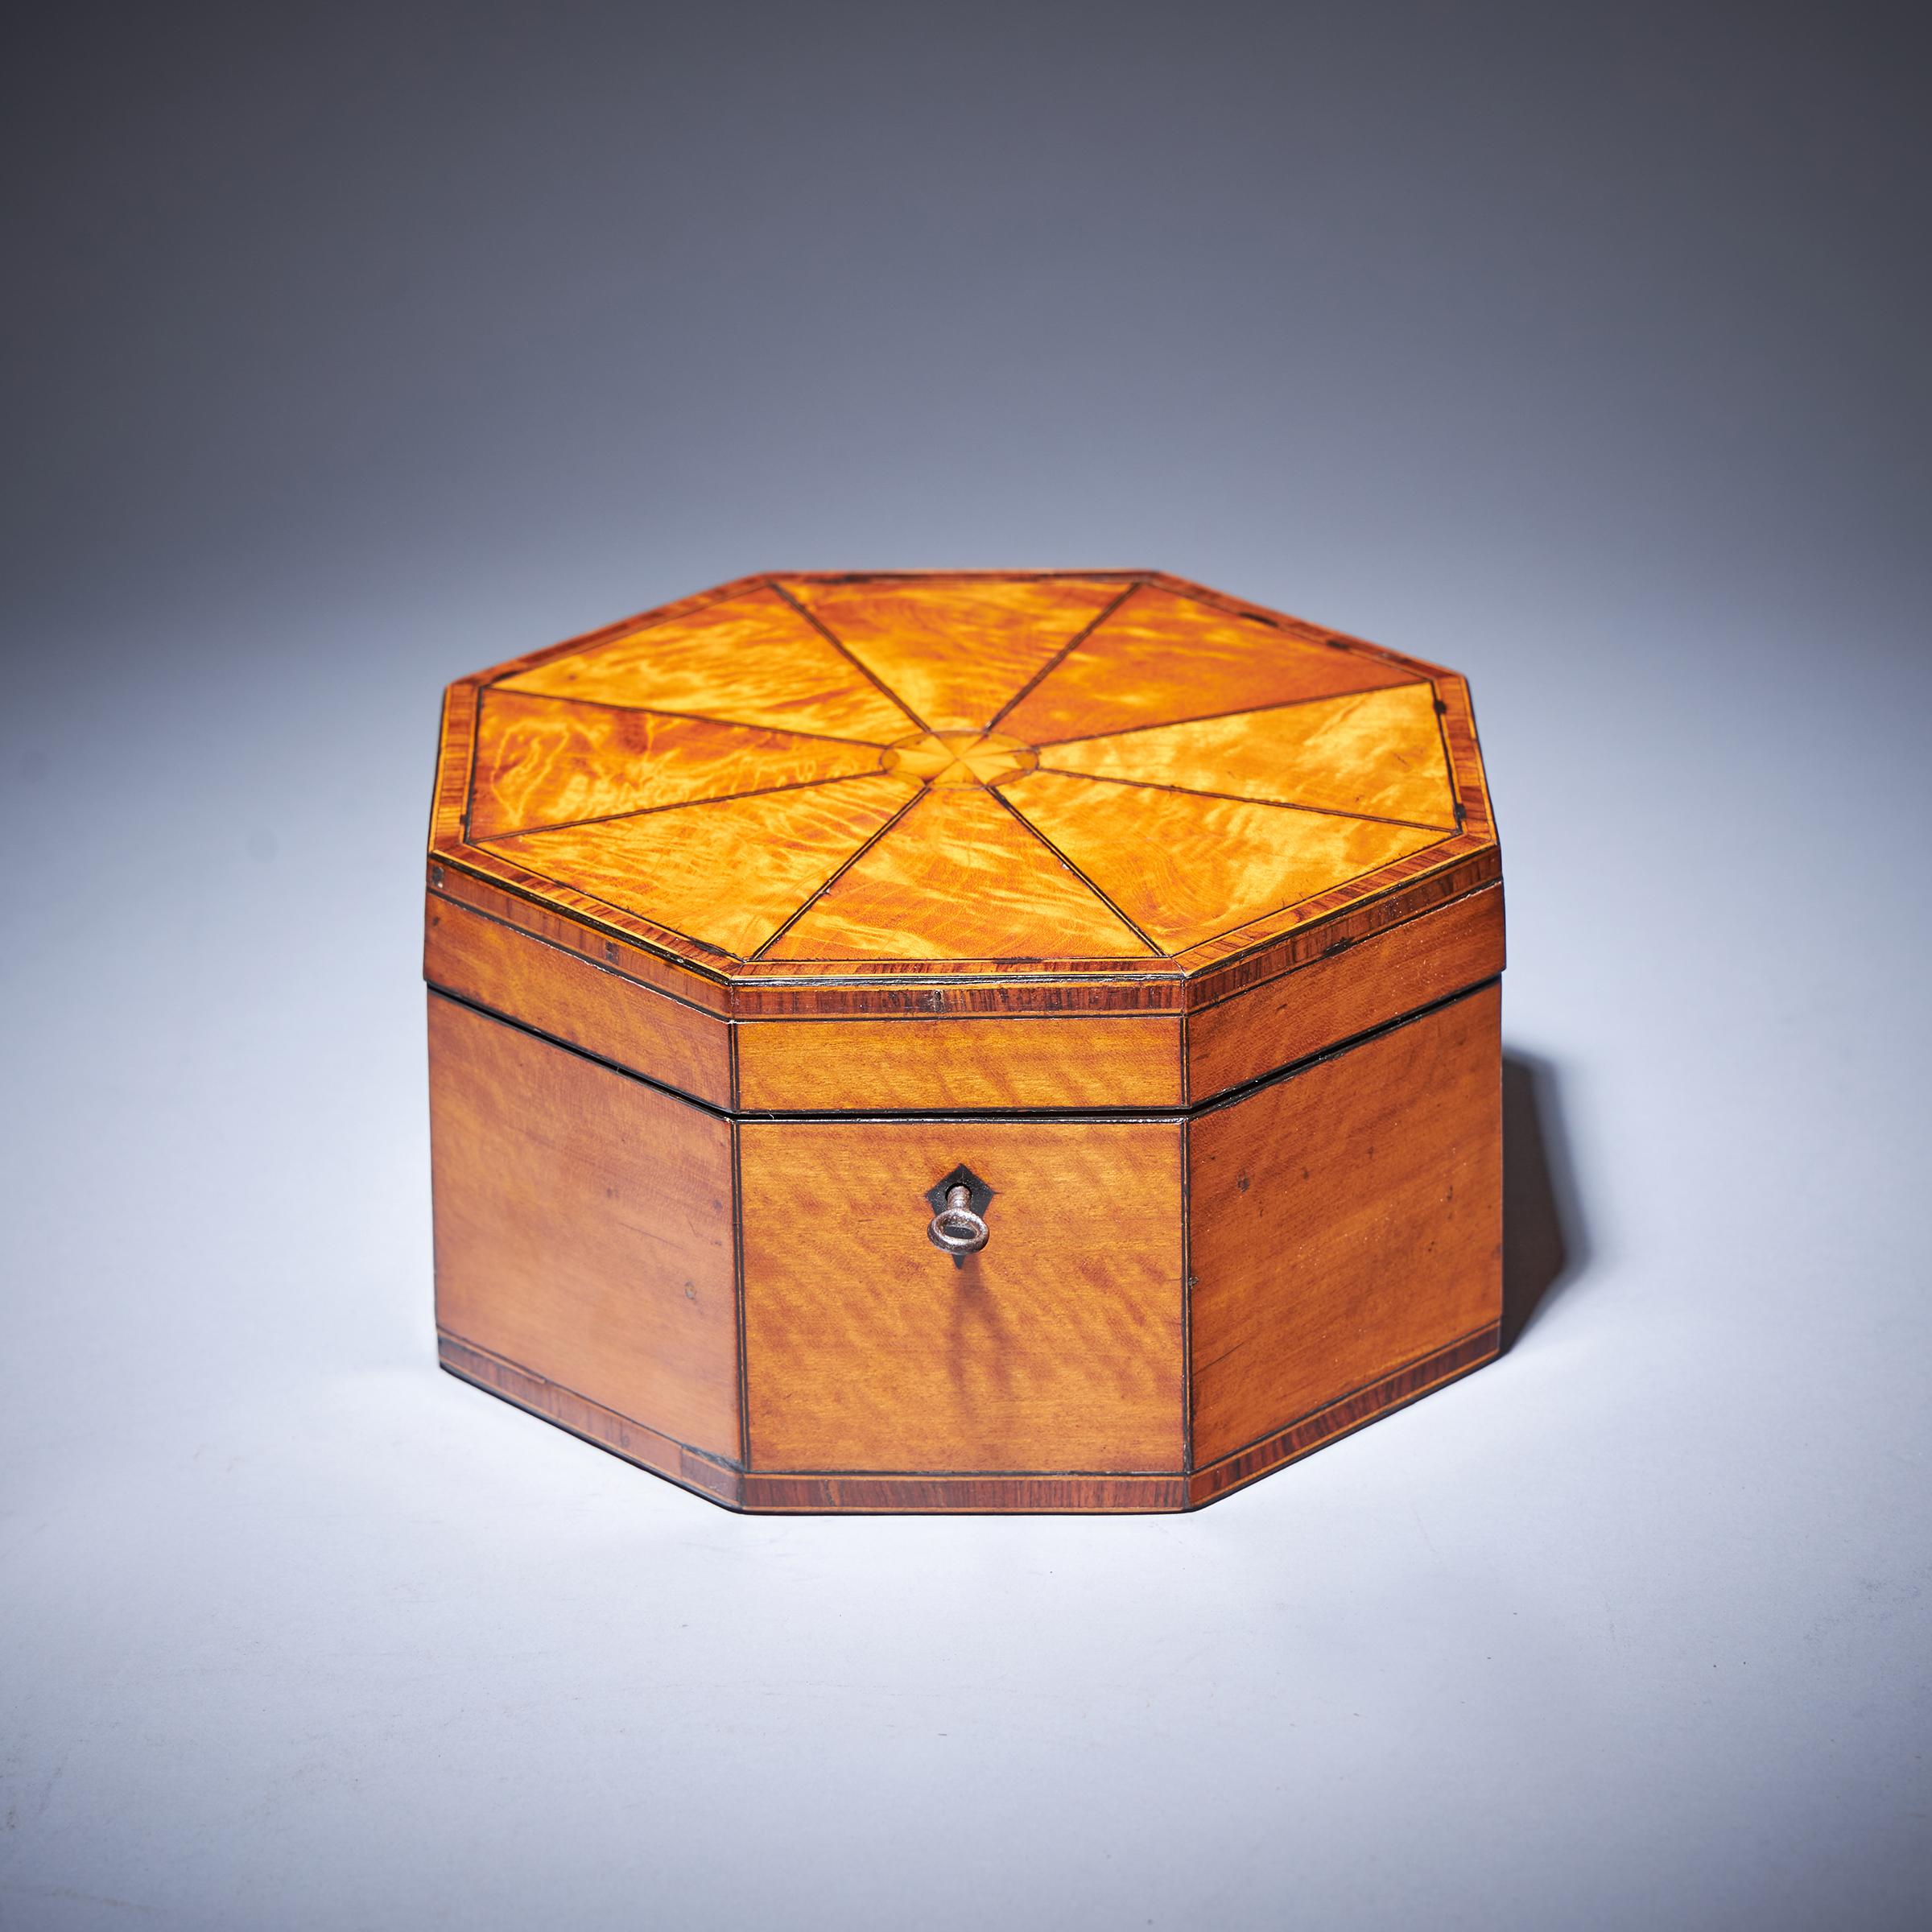 A Fine and Rare Late 18th Century George III Satinwood Octagonal Box, C.1790.
 
The kingwood crossbanded sectional top with ebony and box stringing is finely laid around a central inlaid patera. Opening on double hinges to the ebony lipped satinwood